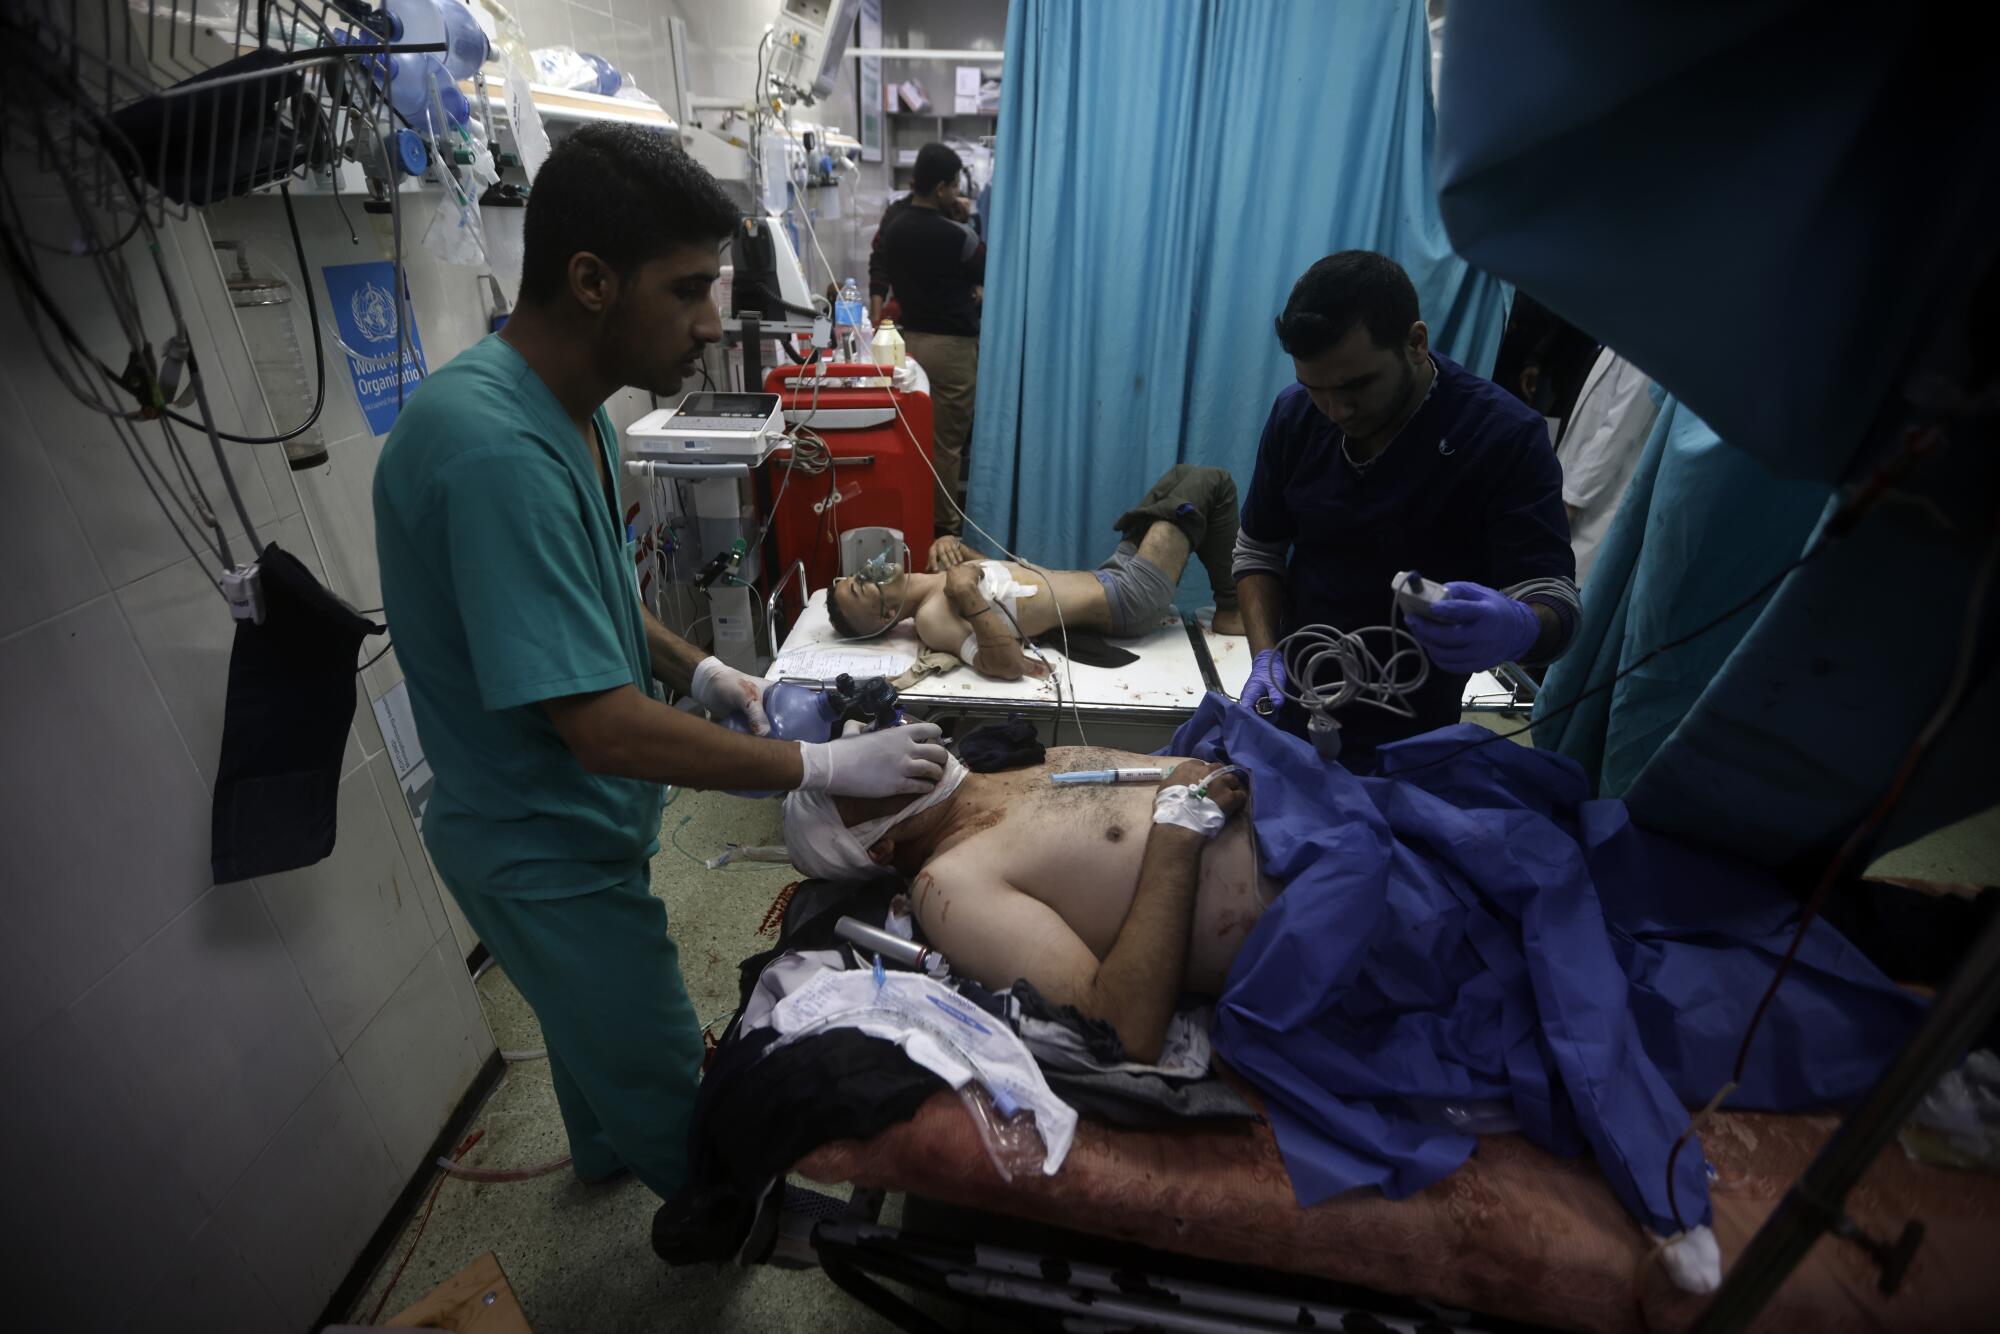 Wounded Gazans receiving treatment at hospital in Khan Yunis